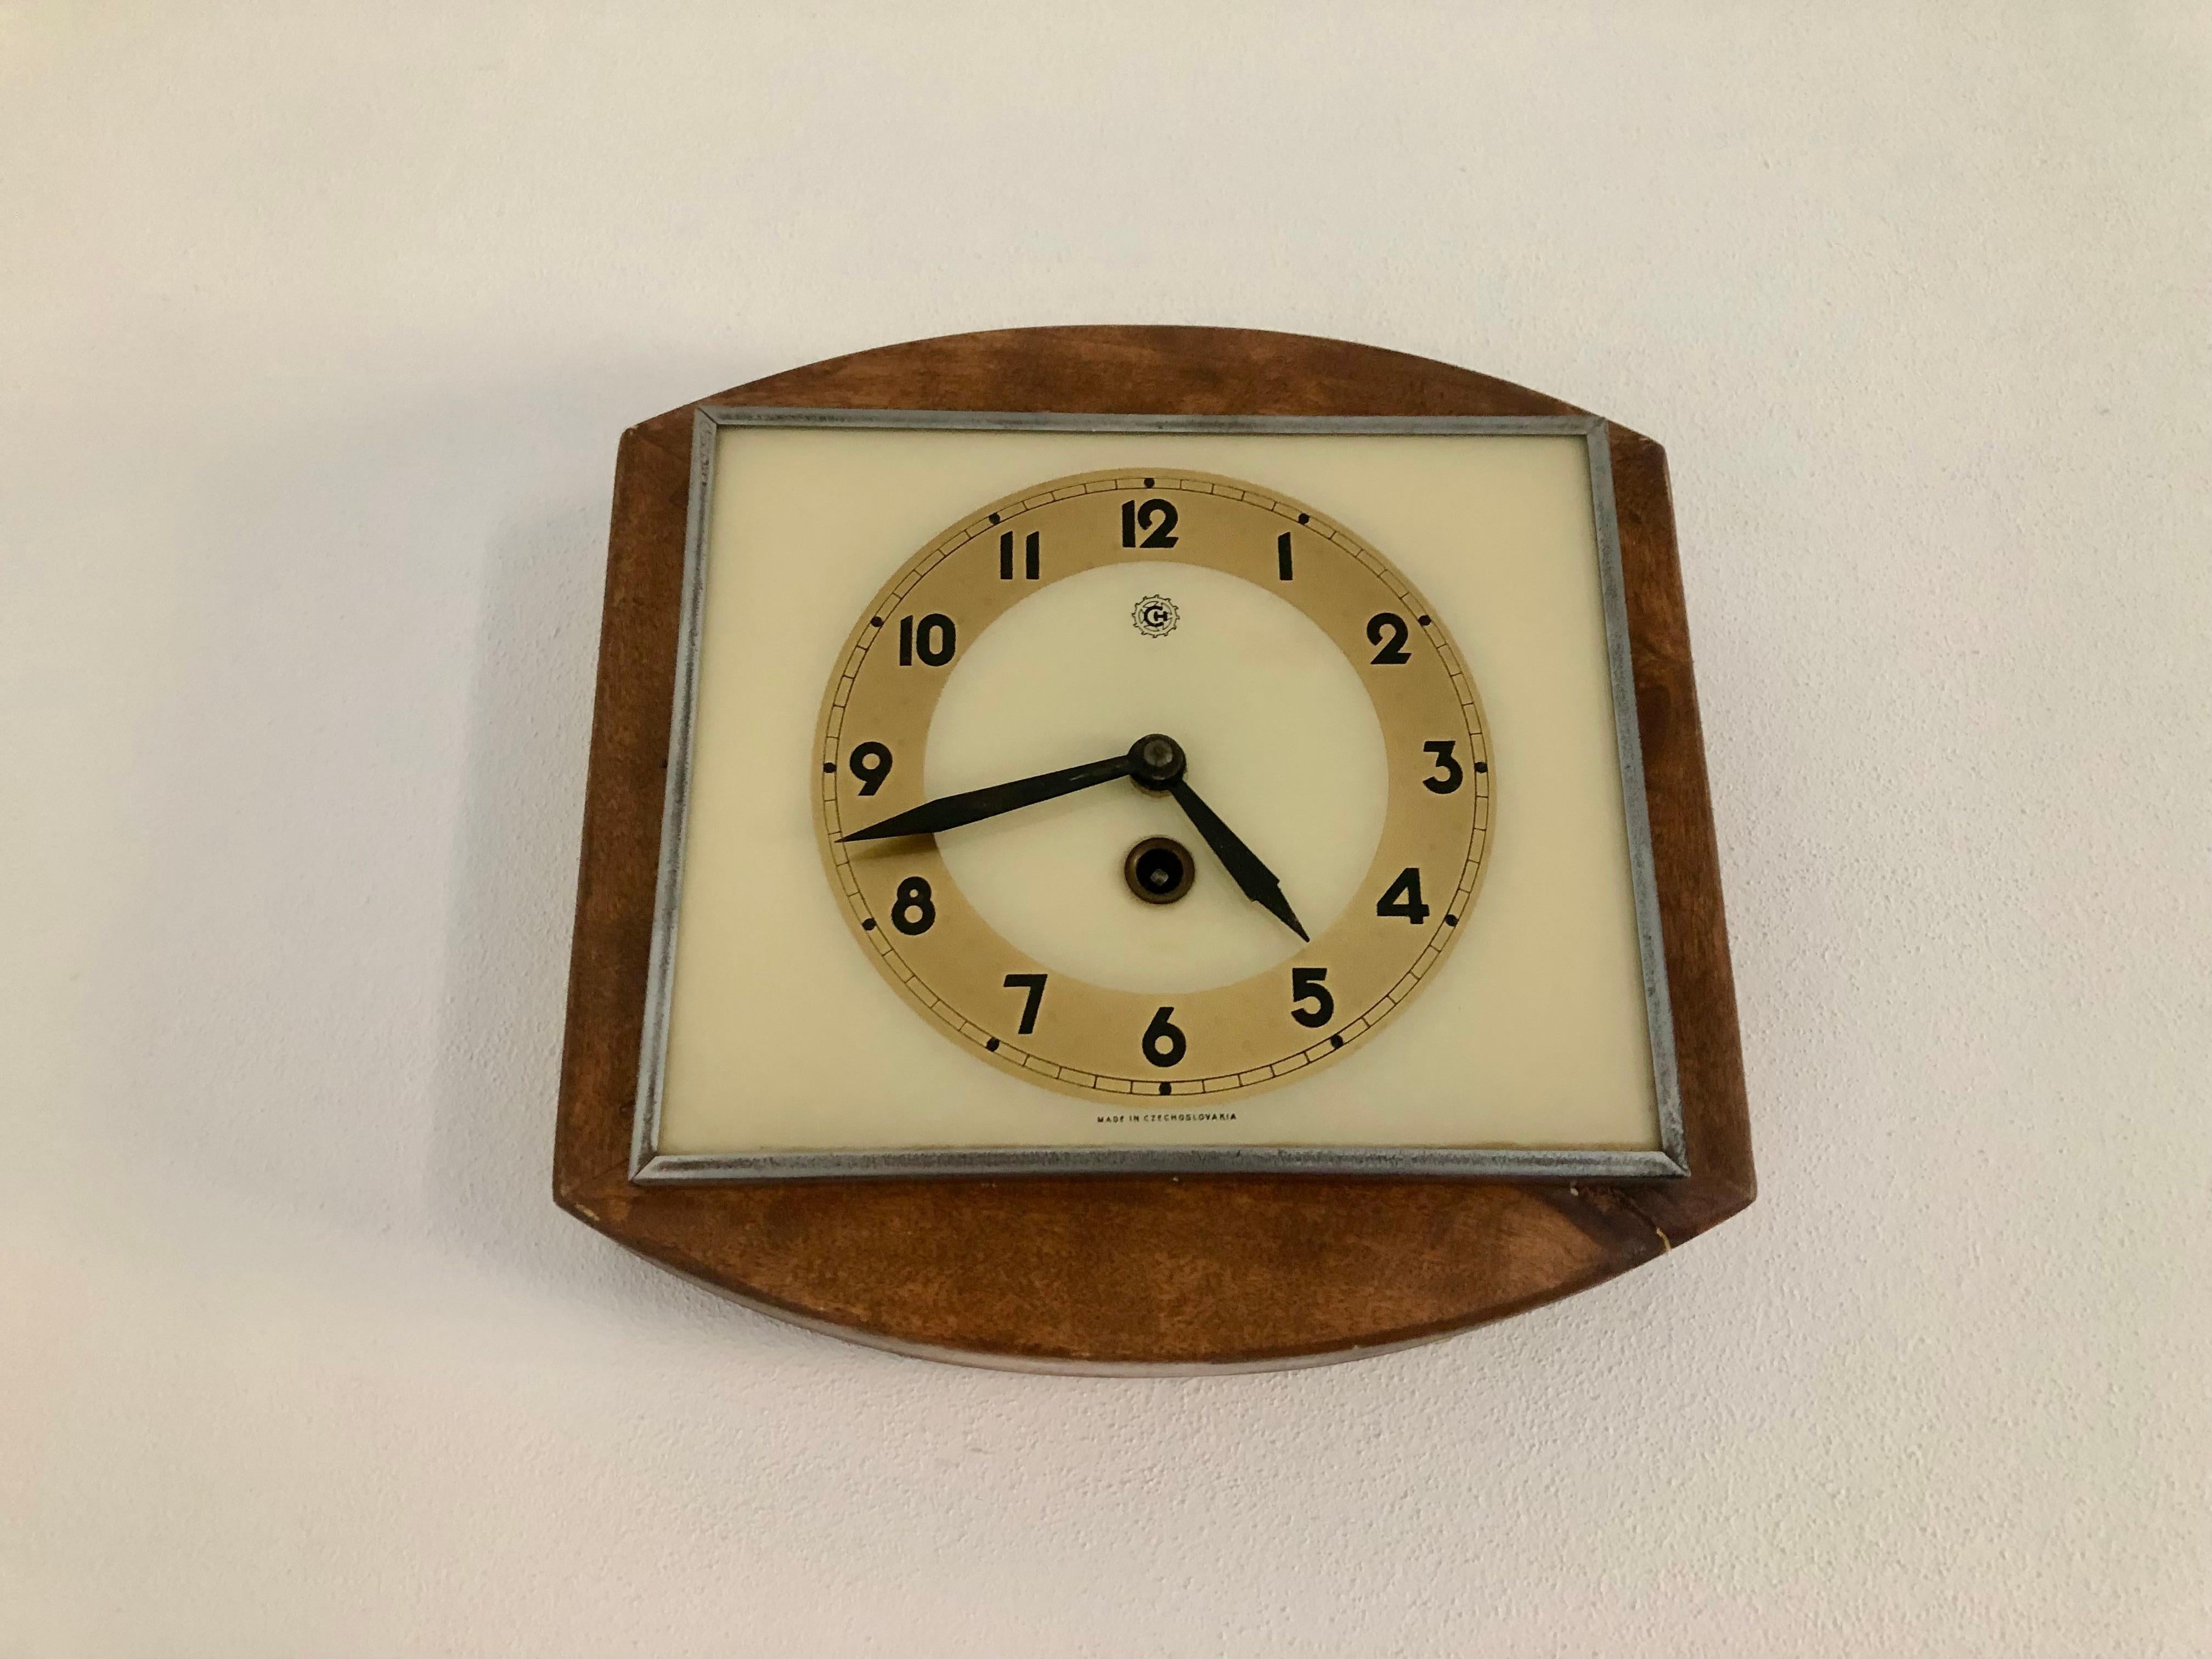 Good original condition.
Wooden frame with glass dial.
Original Prim Czechoslovakia Chimes.
Clock fully working
Key is included.
 